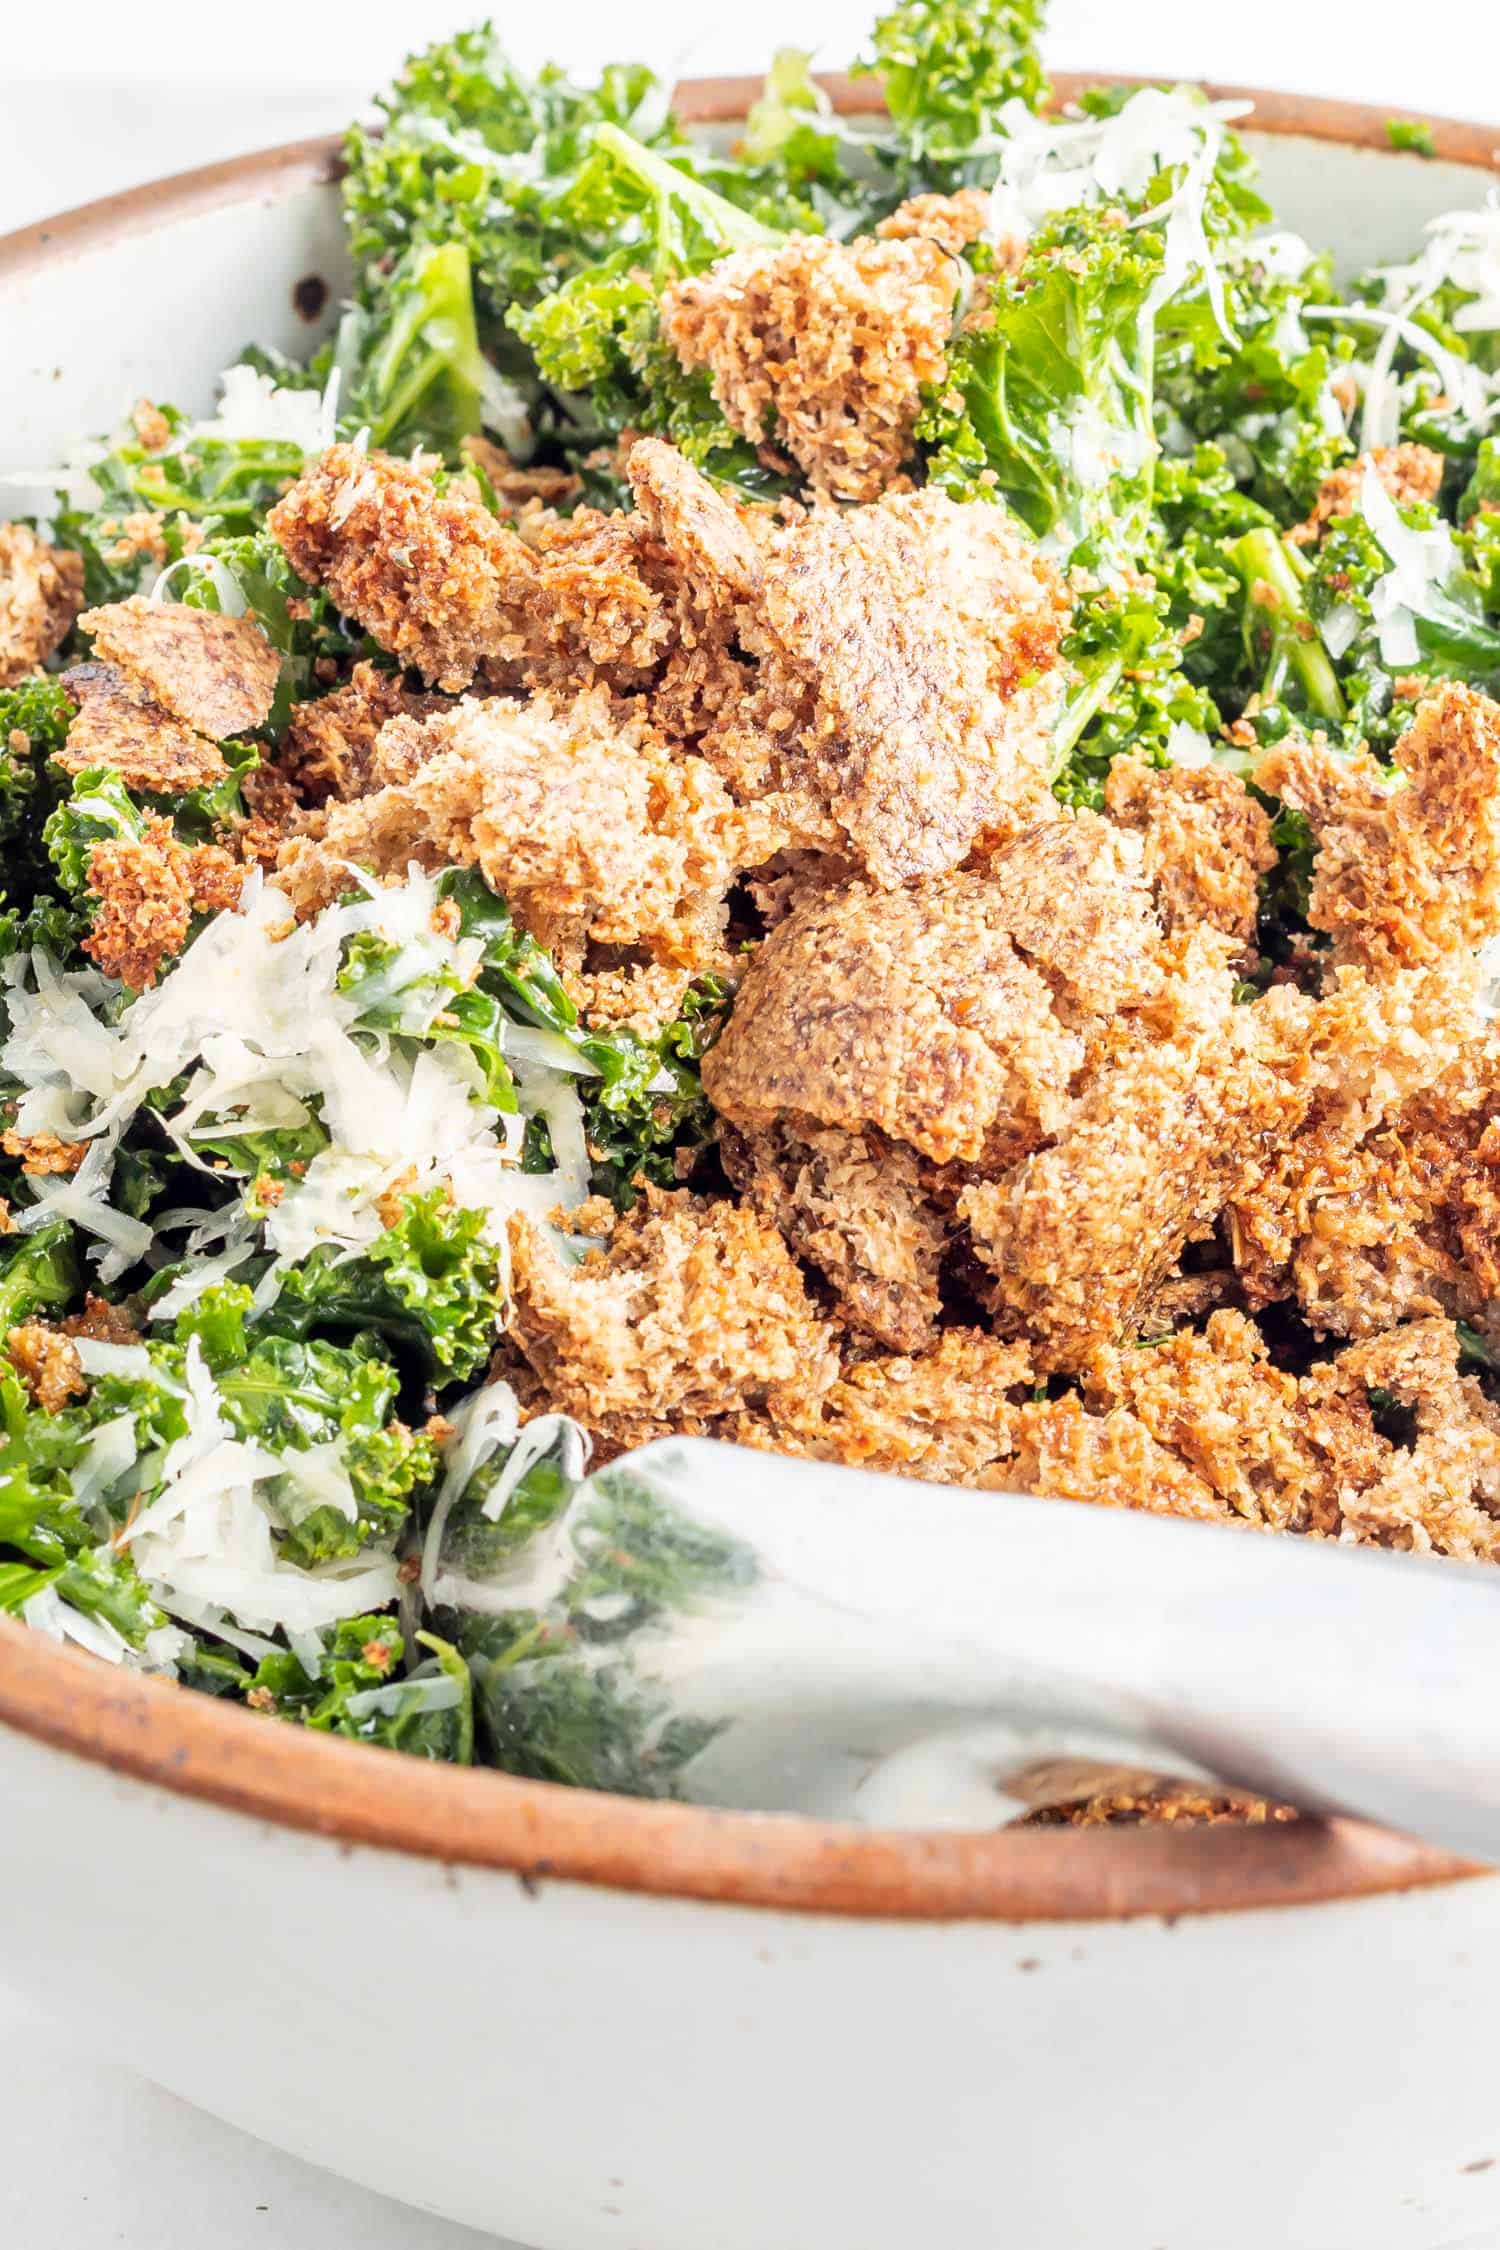 Keto Kale Salad topped with croutons